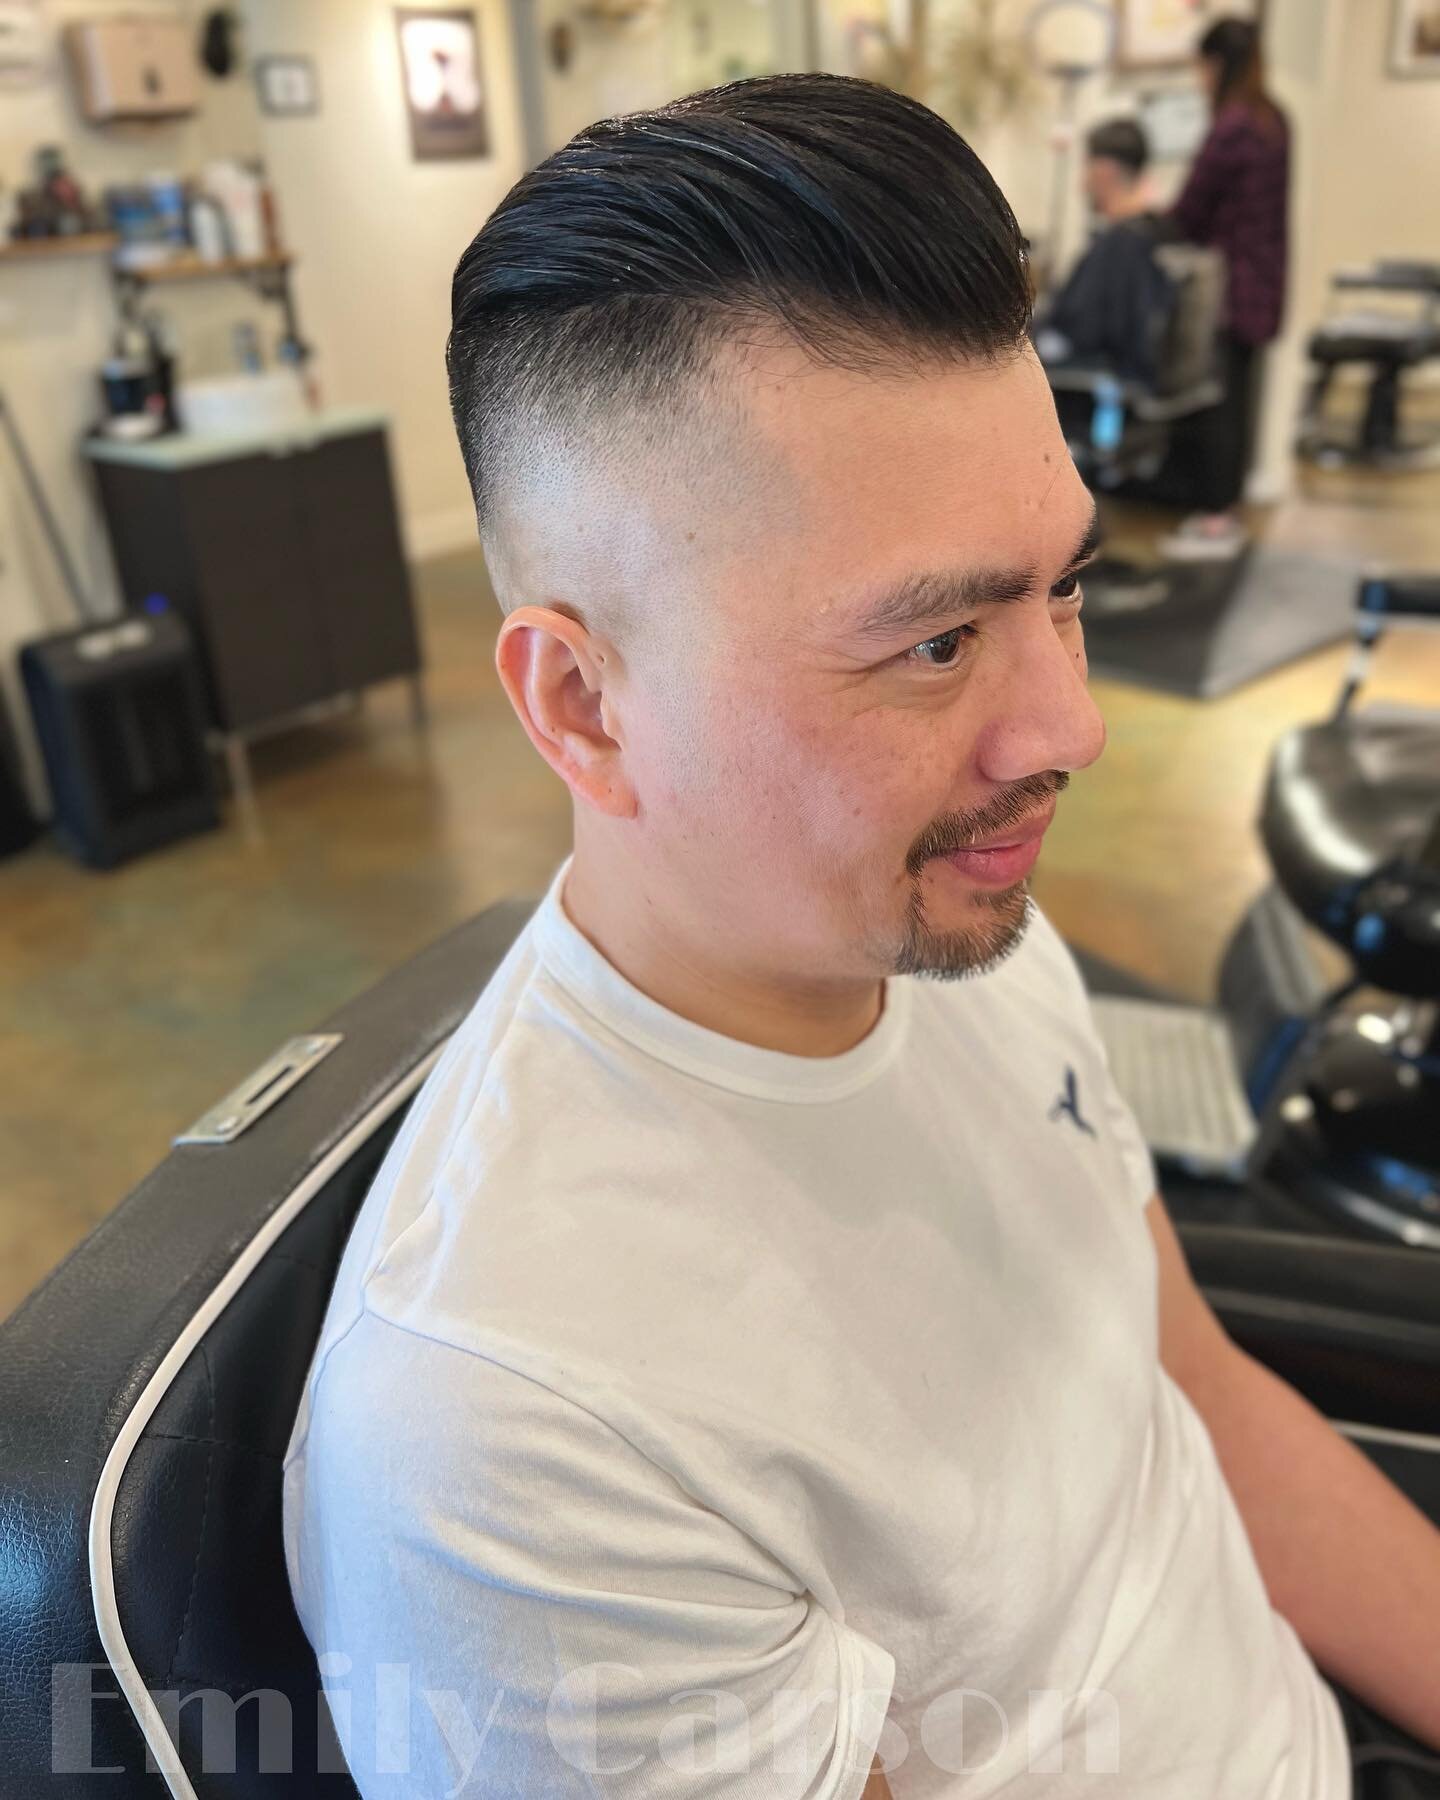 {Dao}

He Likes the high bald fade With a disconnect on the sides and the length to be blended into the fade when Styled back. Products used @gravallese sea salt clay spray and @reuzel extreme hold matte pomade. Both of these products can be purchase